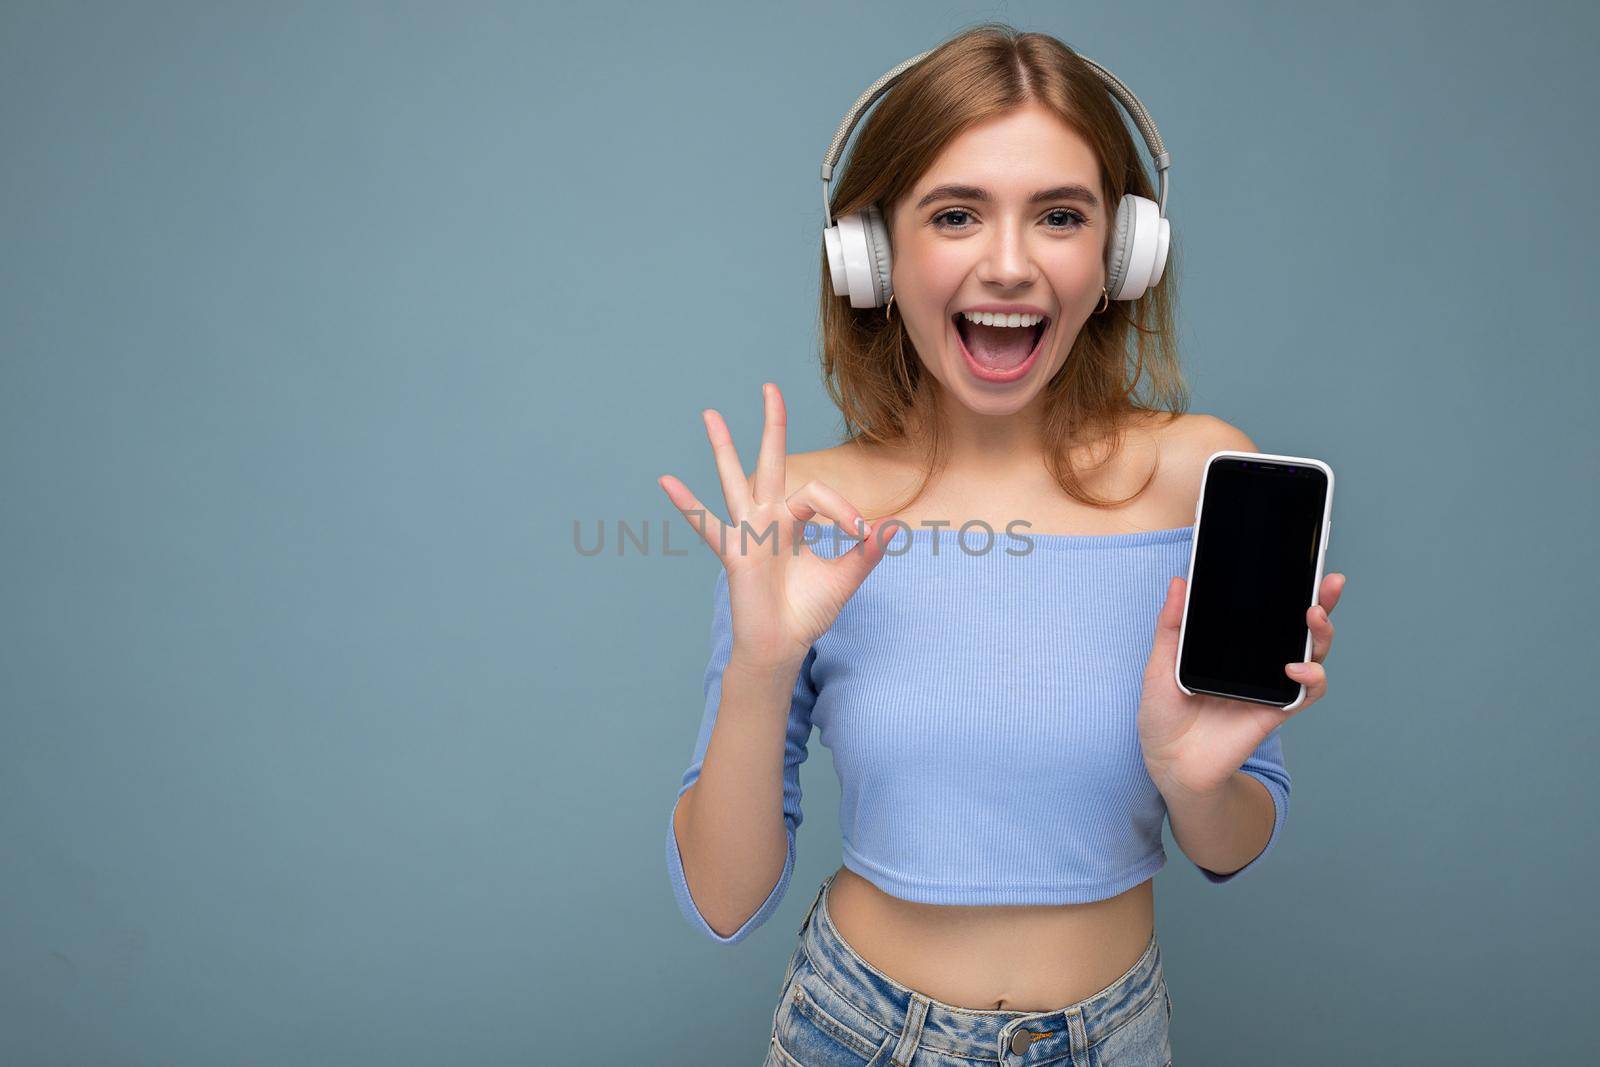 Attractive positive smiling young woman wearing stylish casual outfit isolated on colourful background wall holding and showing mobile phone with empty screen for cutout wearing white bluetooth headphones and having fun looking at camera and showing ok gesture.